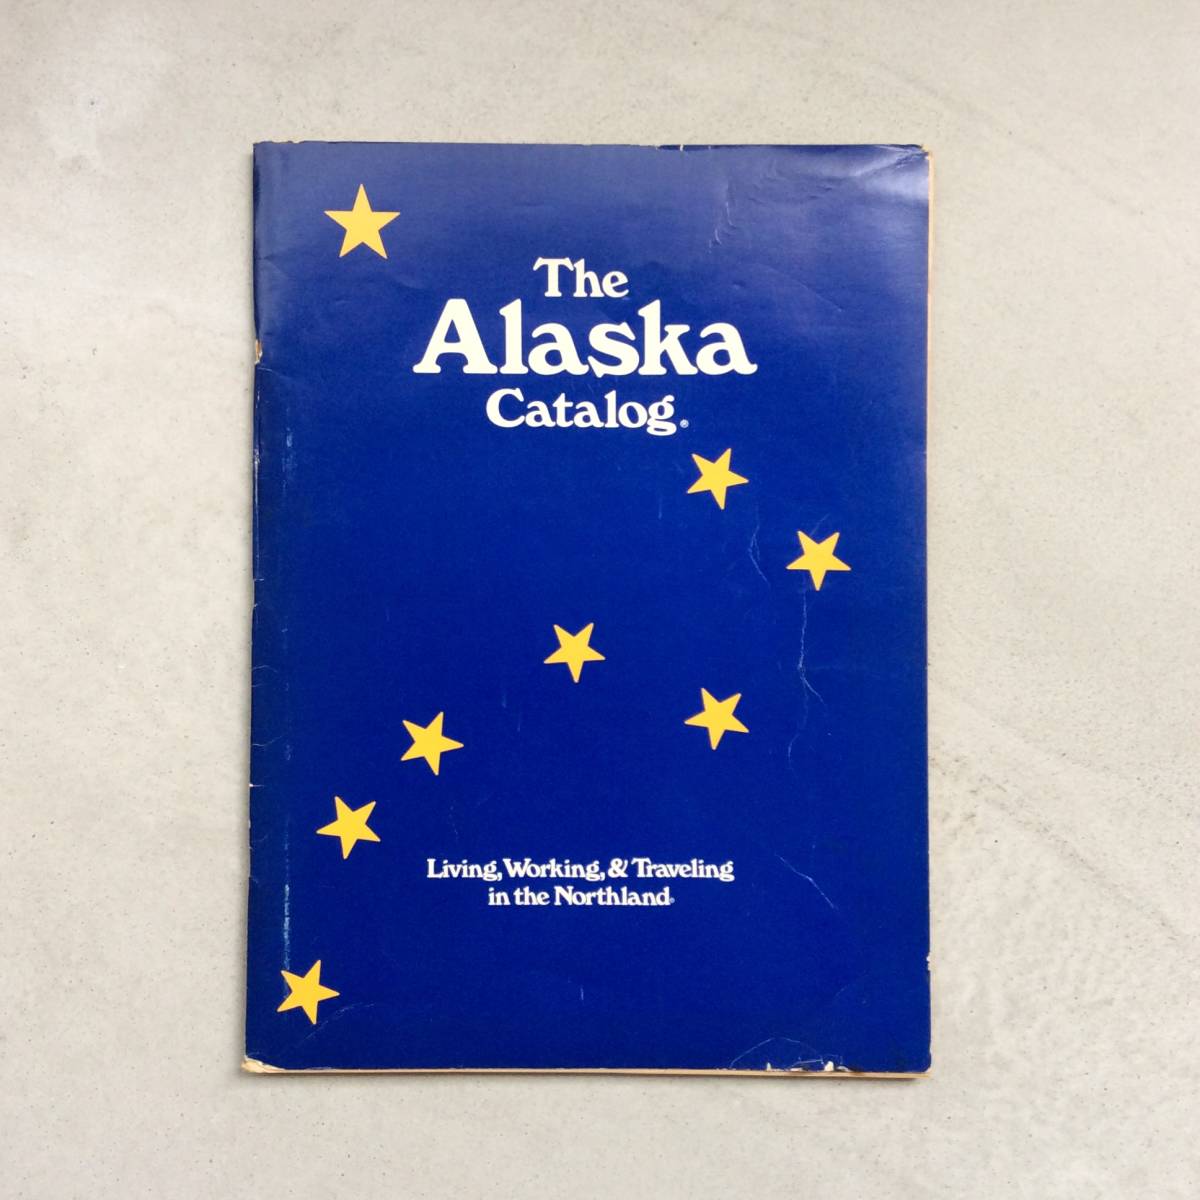 The Alaska Catalog: Living, Working, & Traveling in the Northland（アラスカ・カタログ）1977年